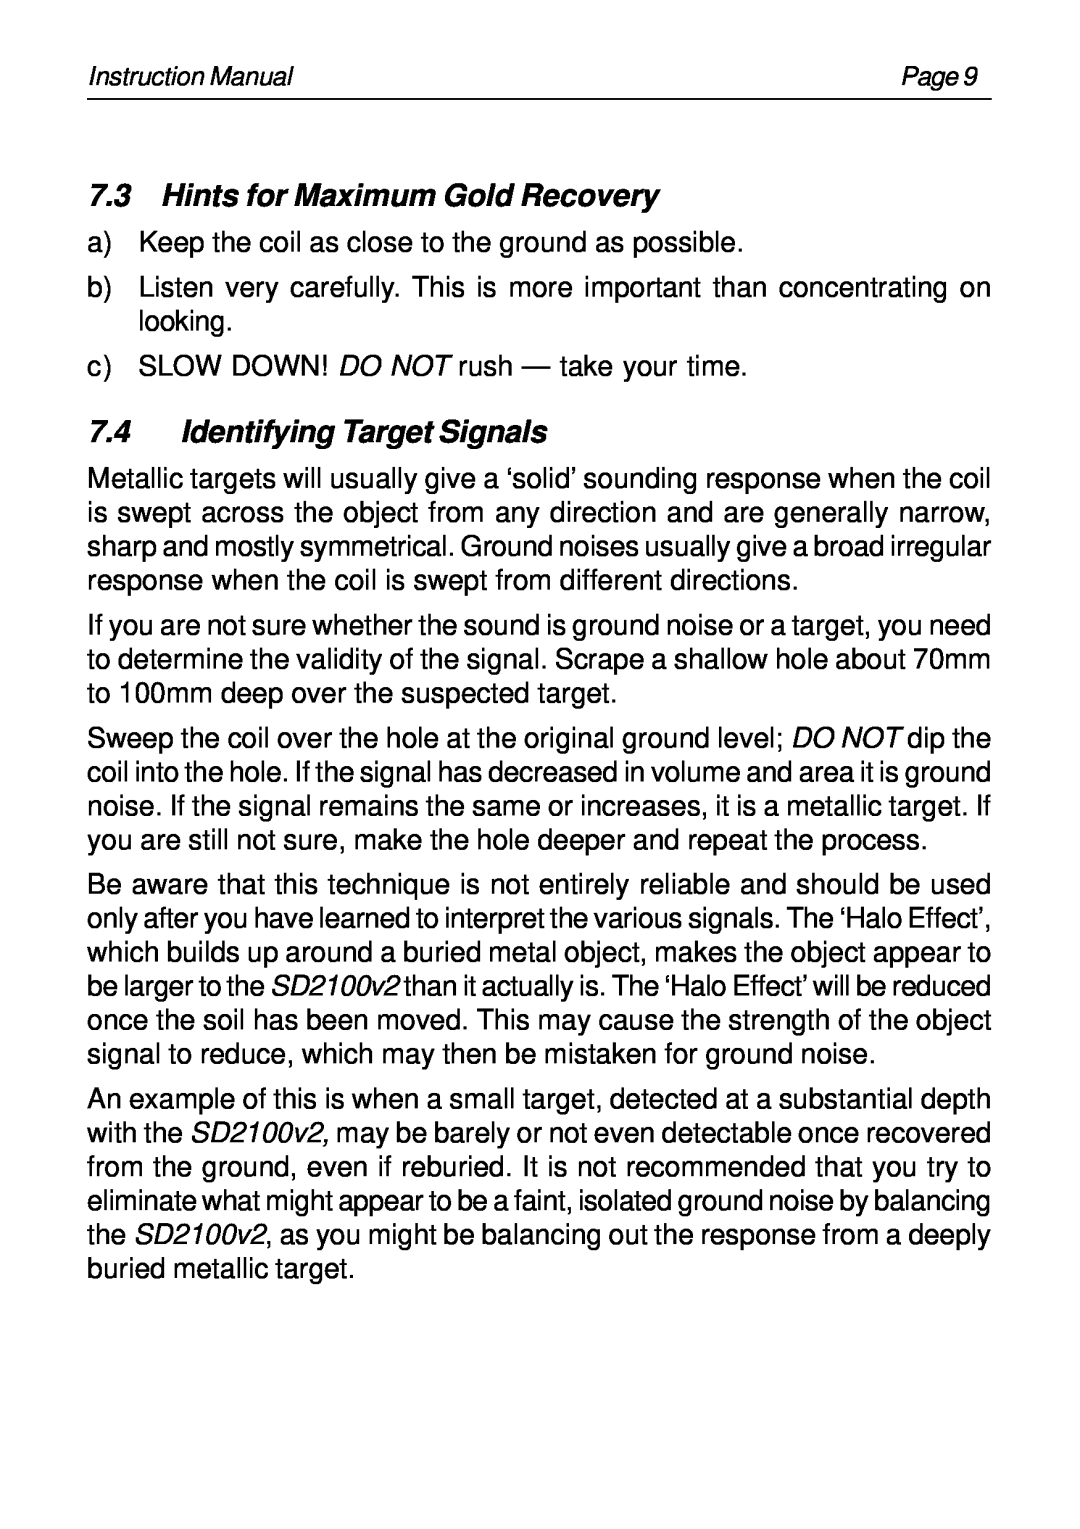 Minelab SD2100v2 instruction manual Hints for Maximum Gold Recovery, Identifying Target Signals 